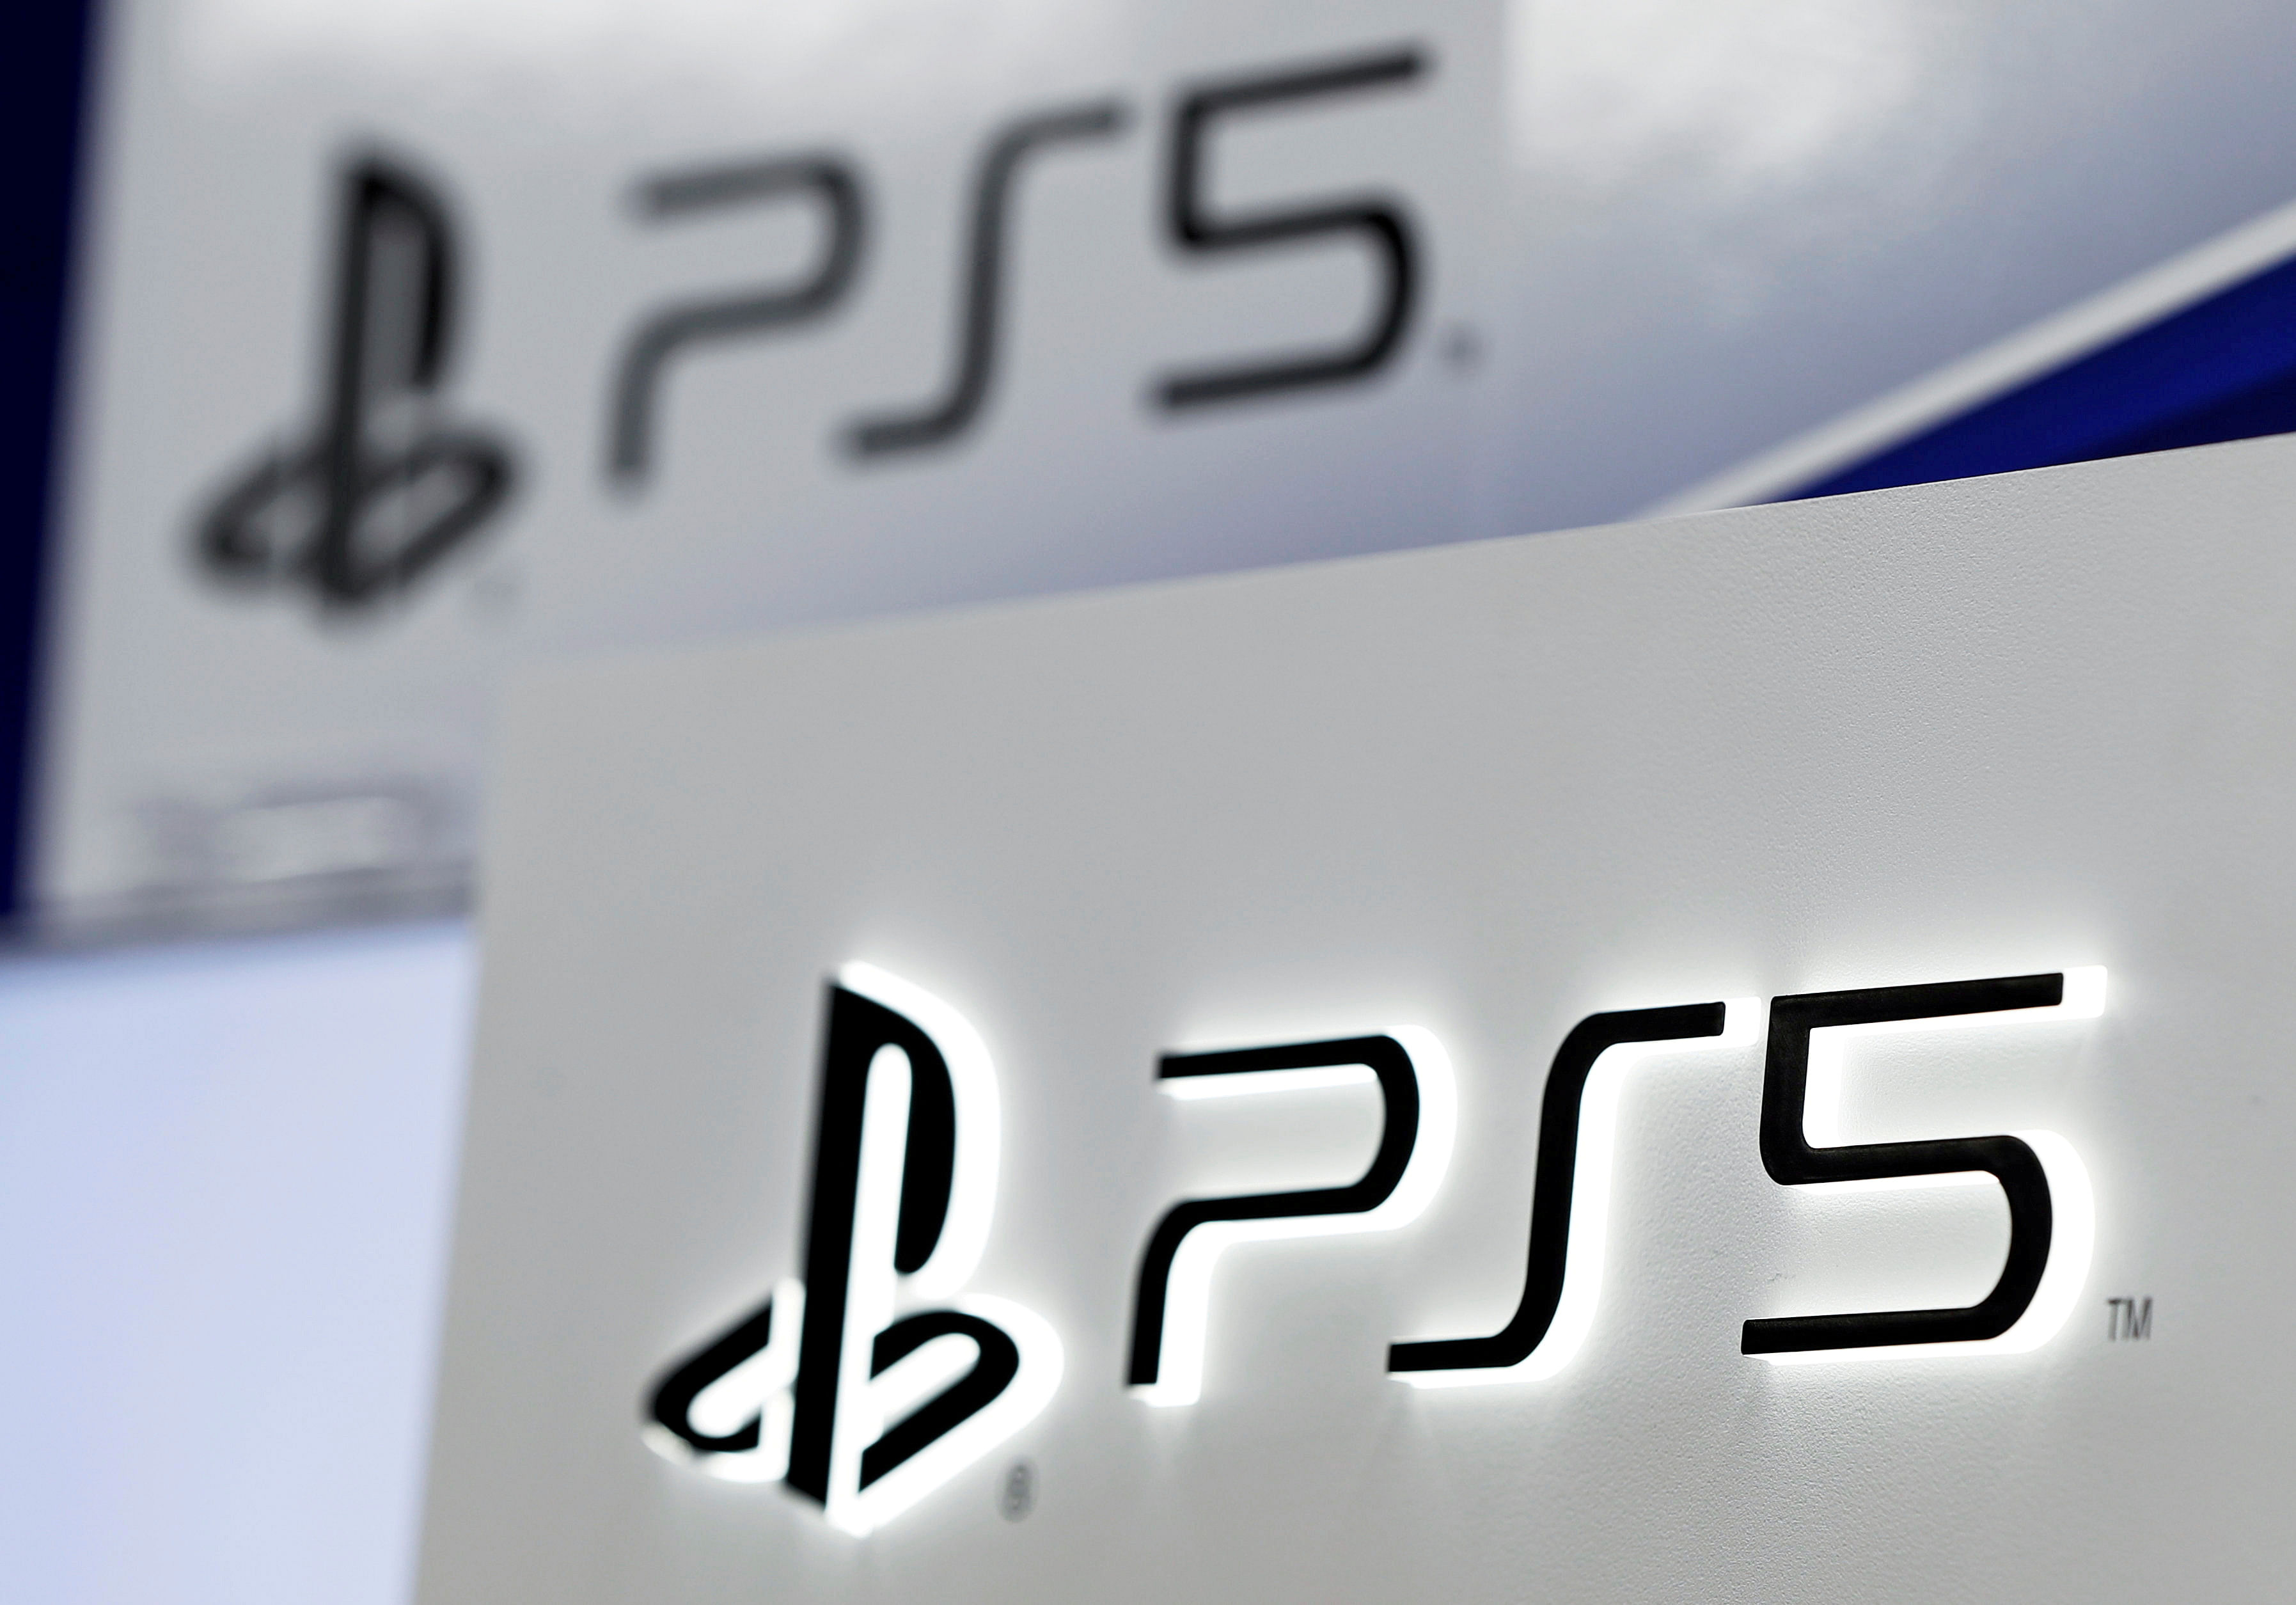 The logos of Sony's PlayStation 5 are displayed at the consumer electronics retailer chain Bic Camera, ahead of its official launch, in Tokyo, Japan November 10, 2020. Credit: REUTERS